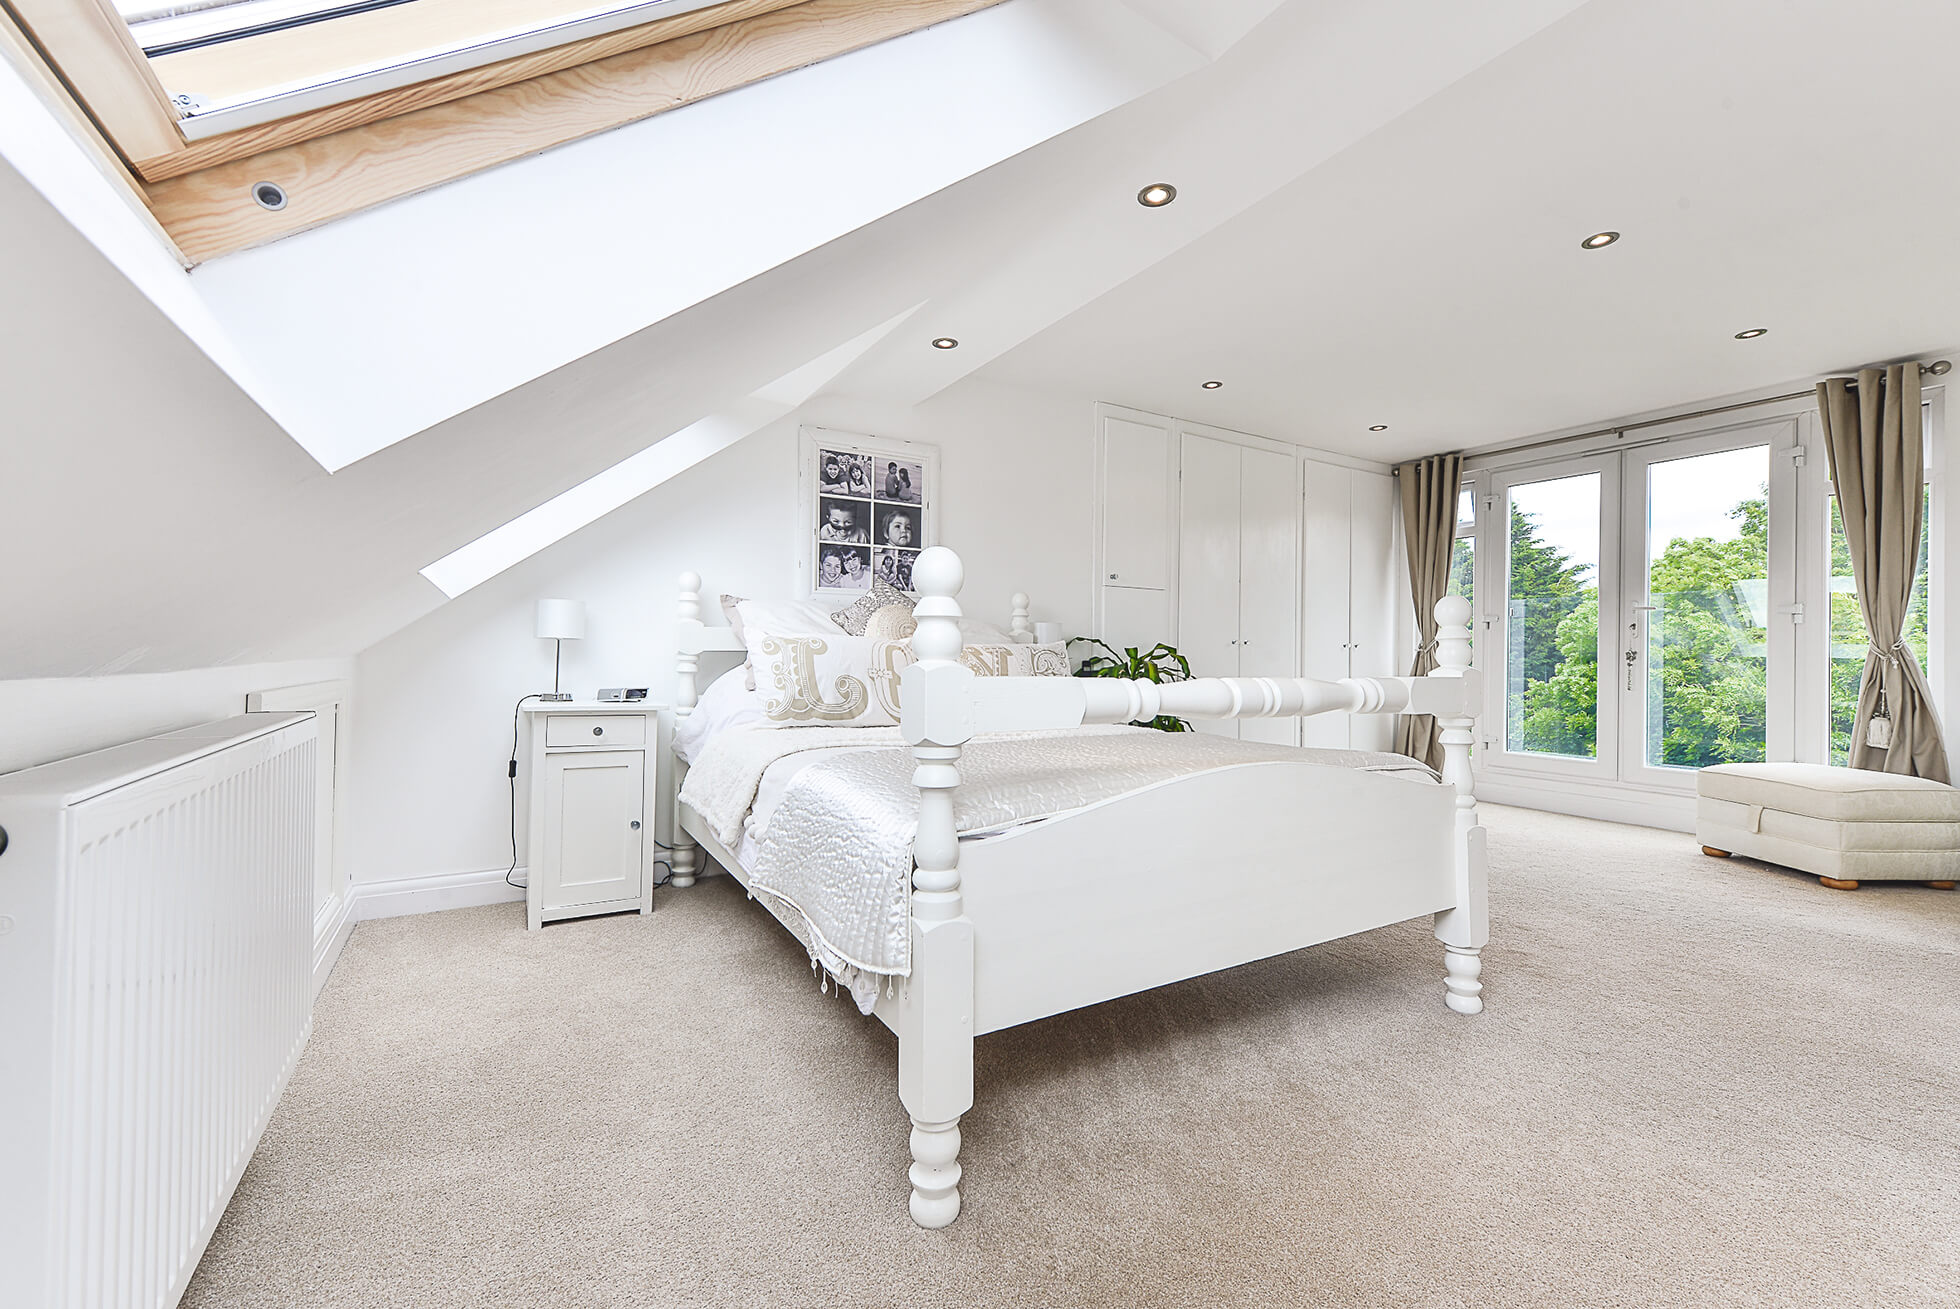 Do you have a question about converting your Loft in Wheathampstead? Here are the most popular questions asked by our clients.